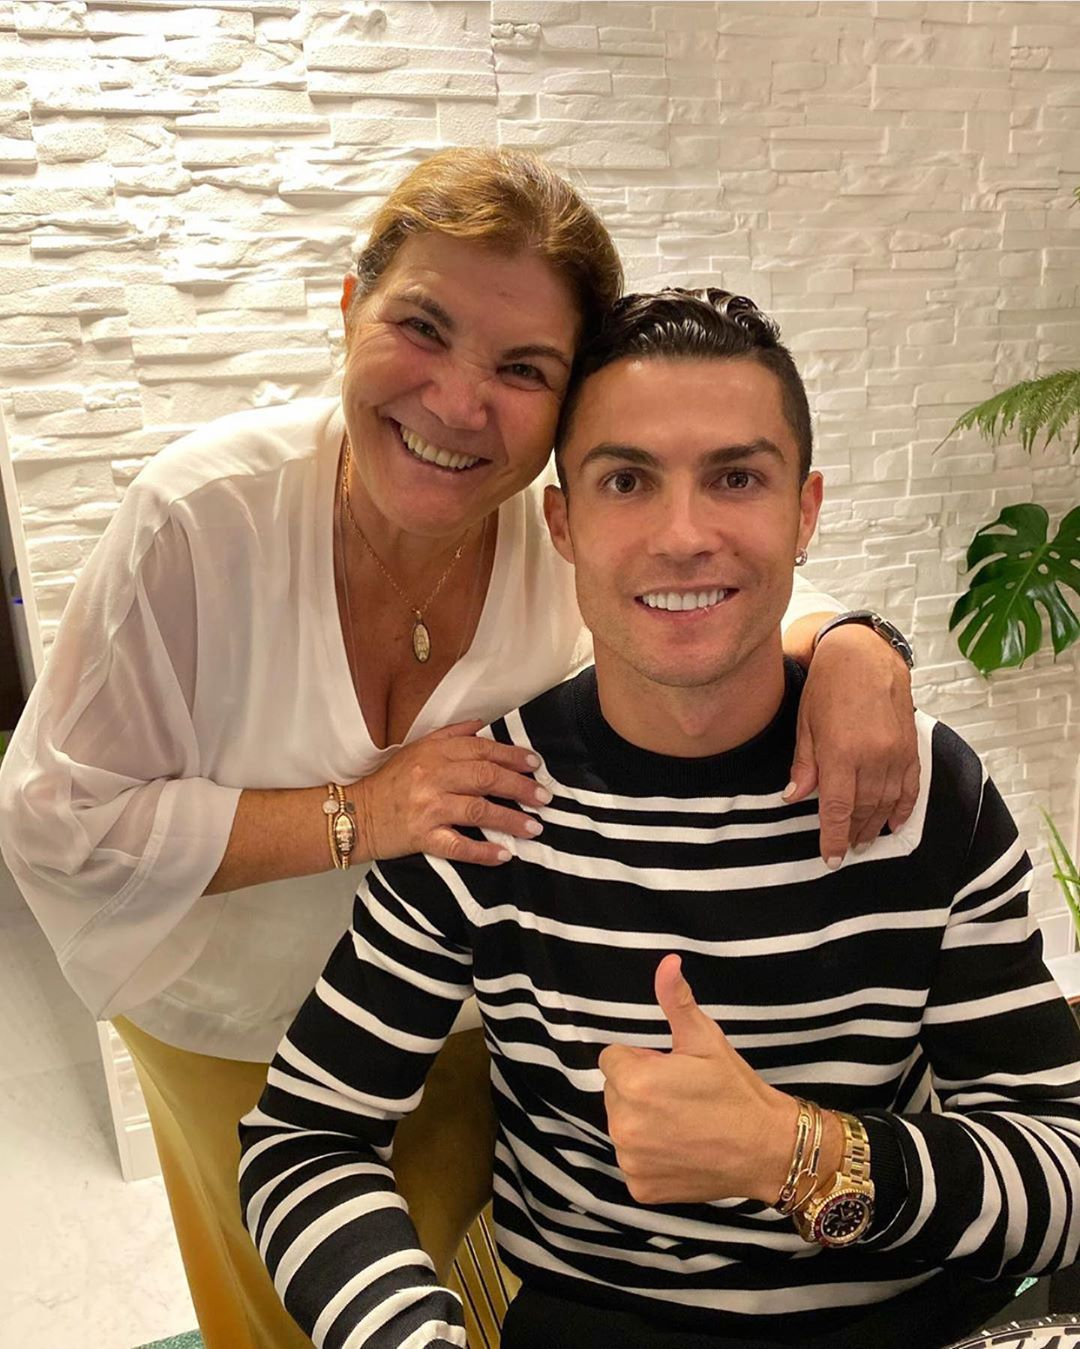 Ronaldo has been in Madeira near to his mother during the coronavirus pandemic